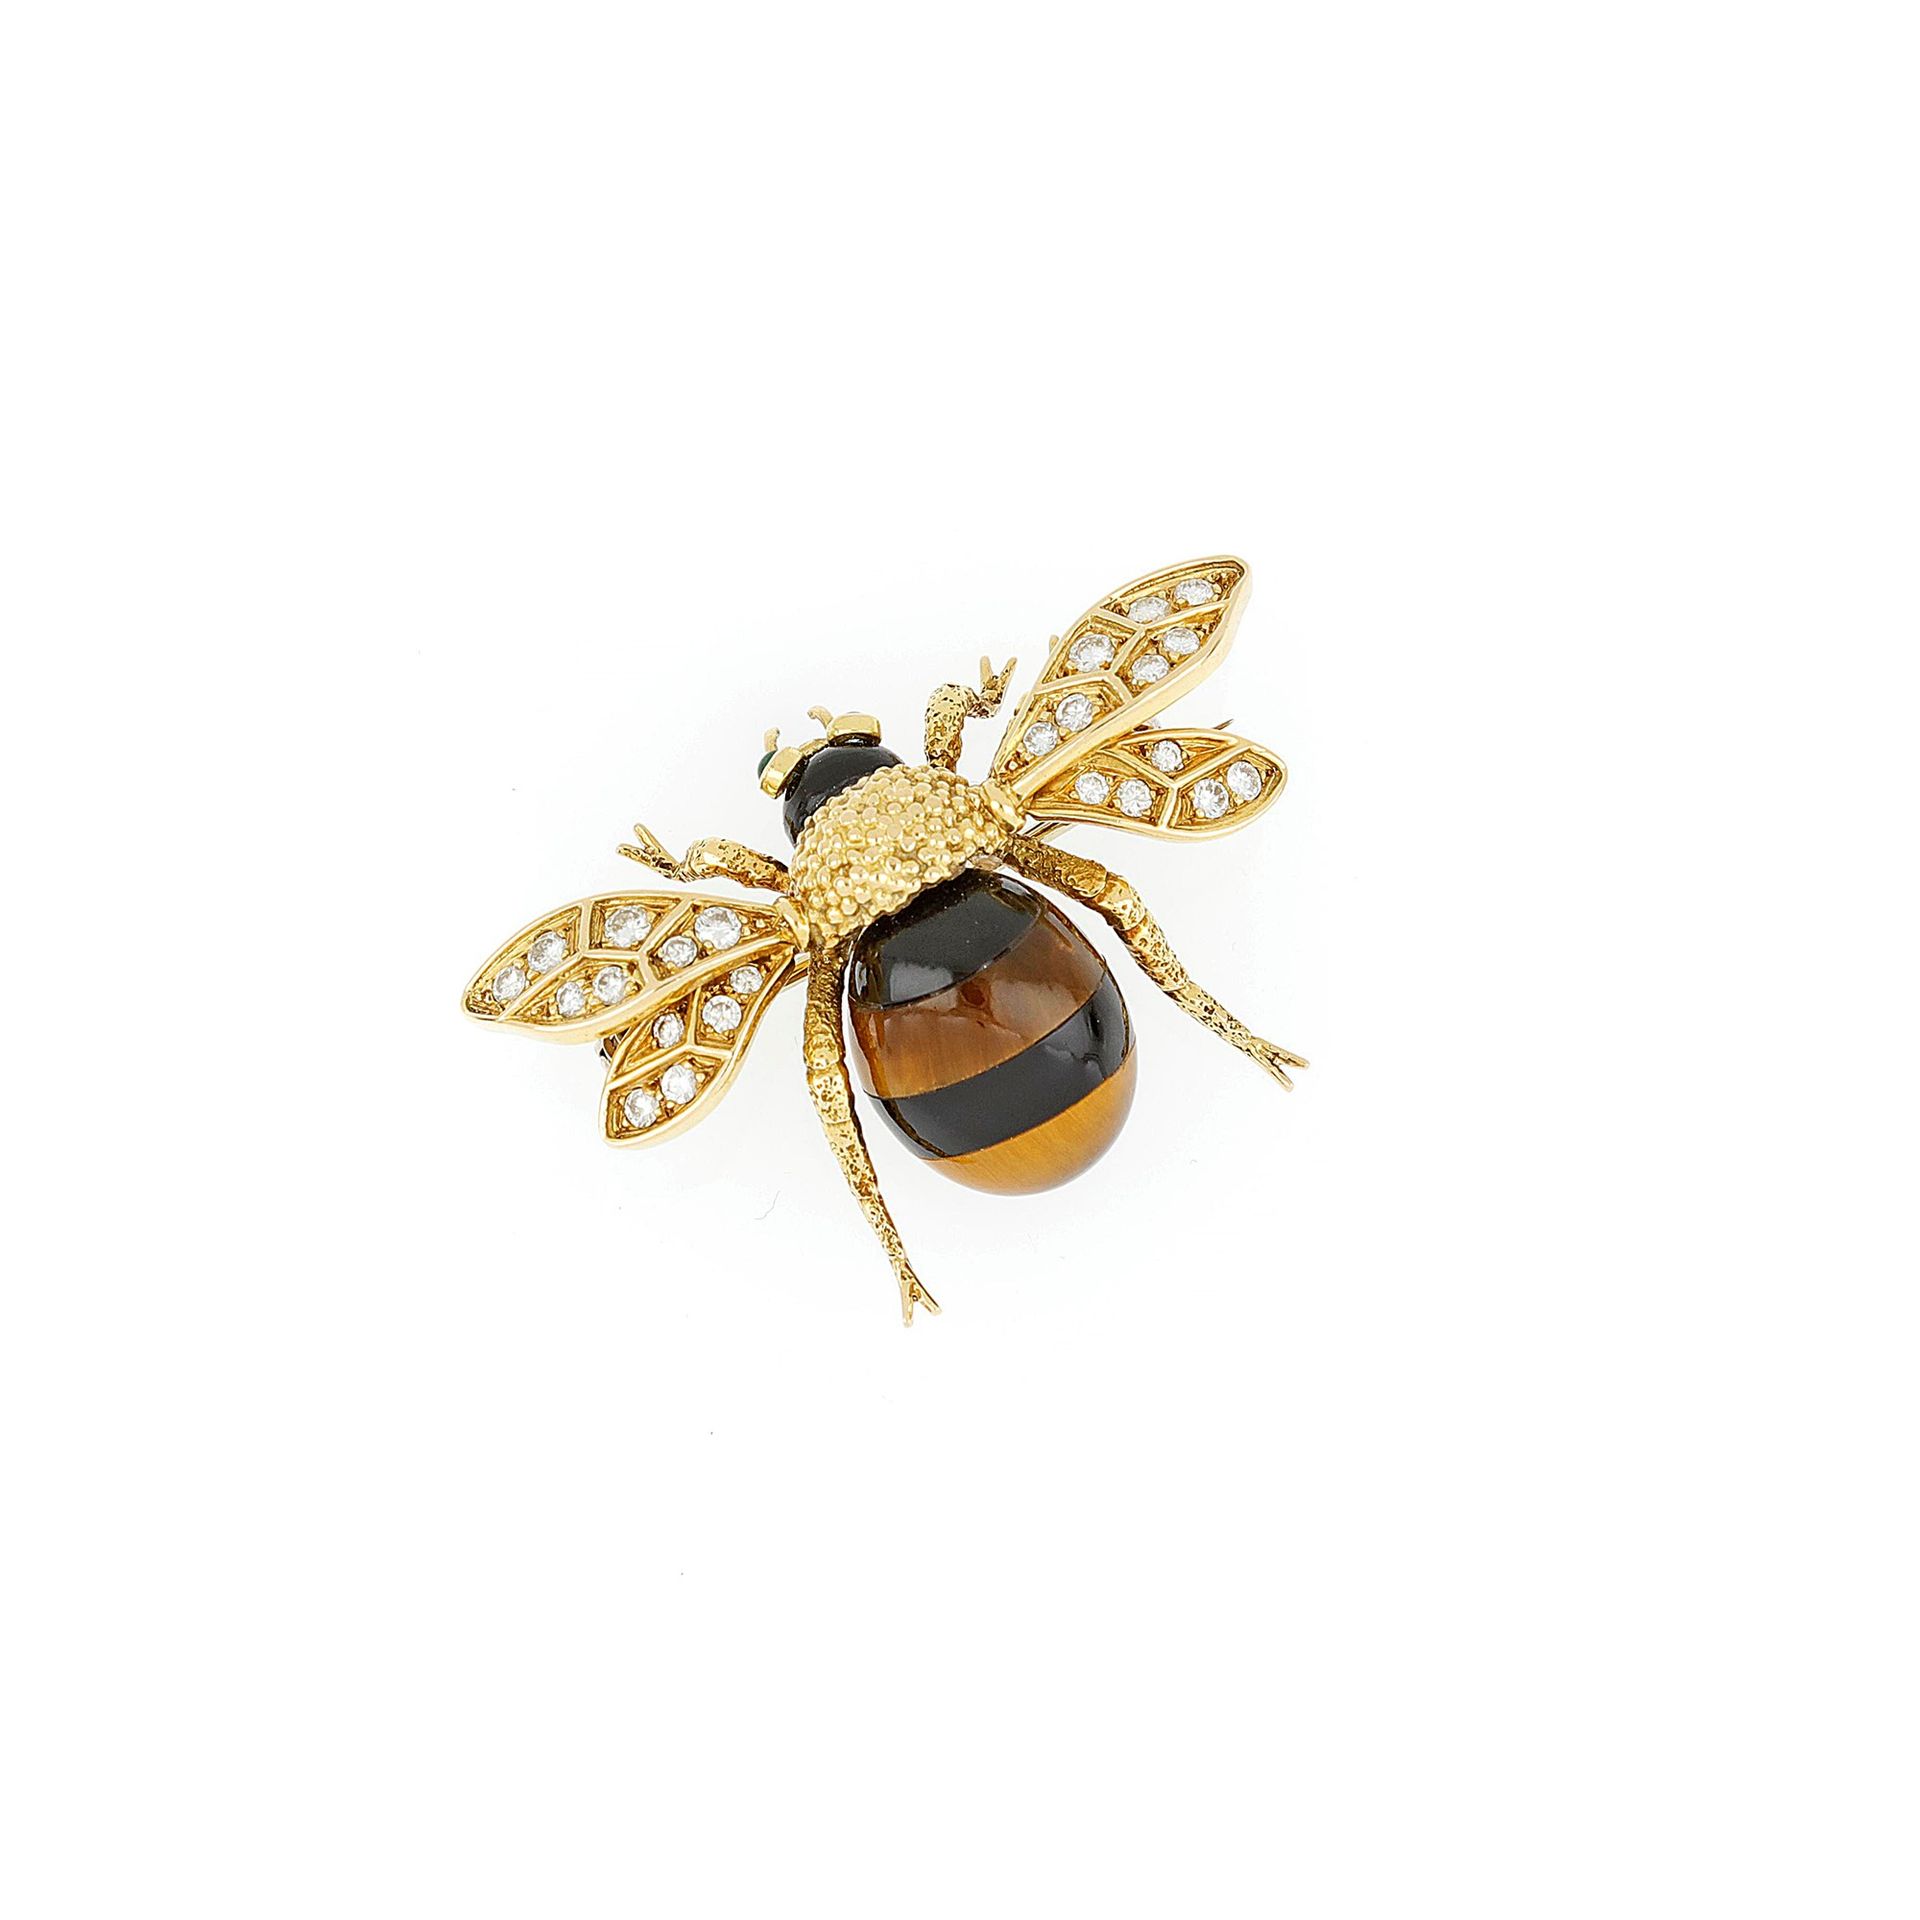 Null 18 Kt yellow gold insect brooch with onyx body and tiger eye, wings finishe&hellip;